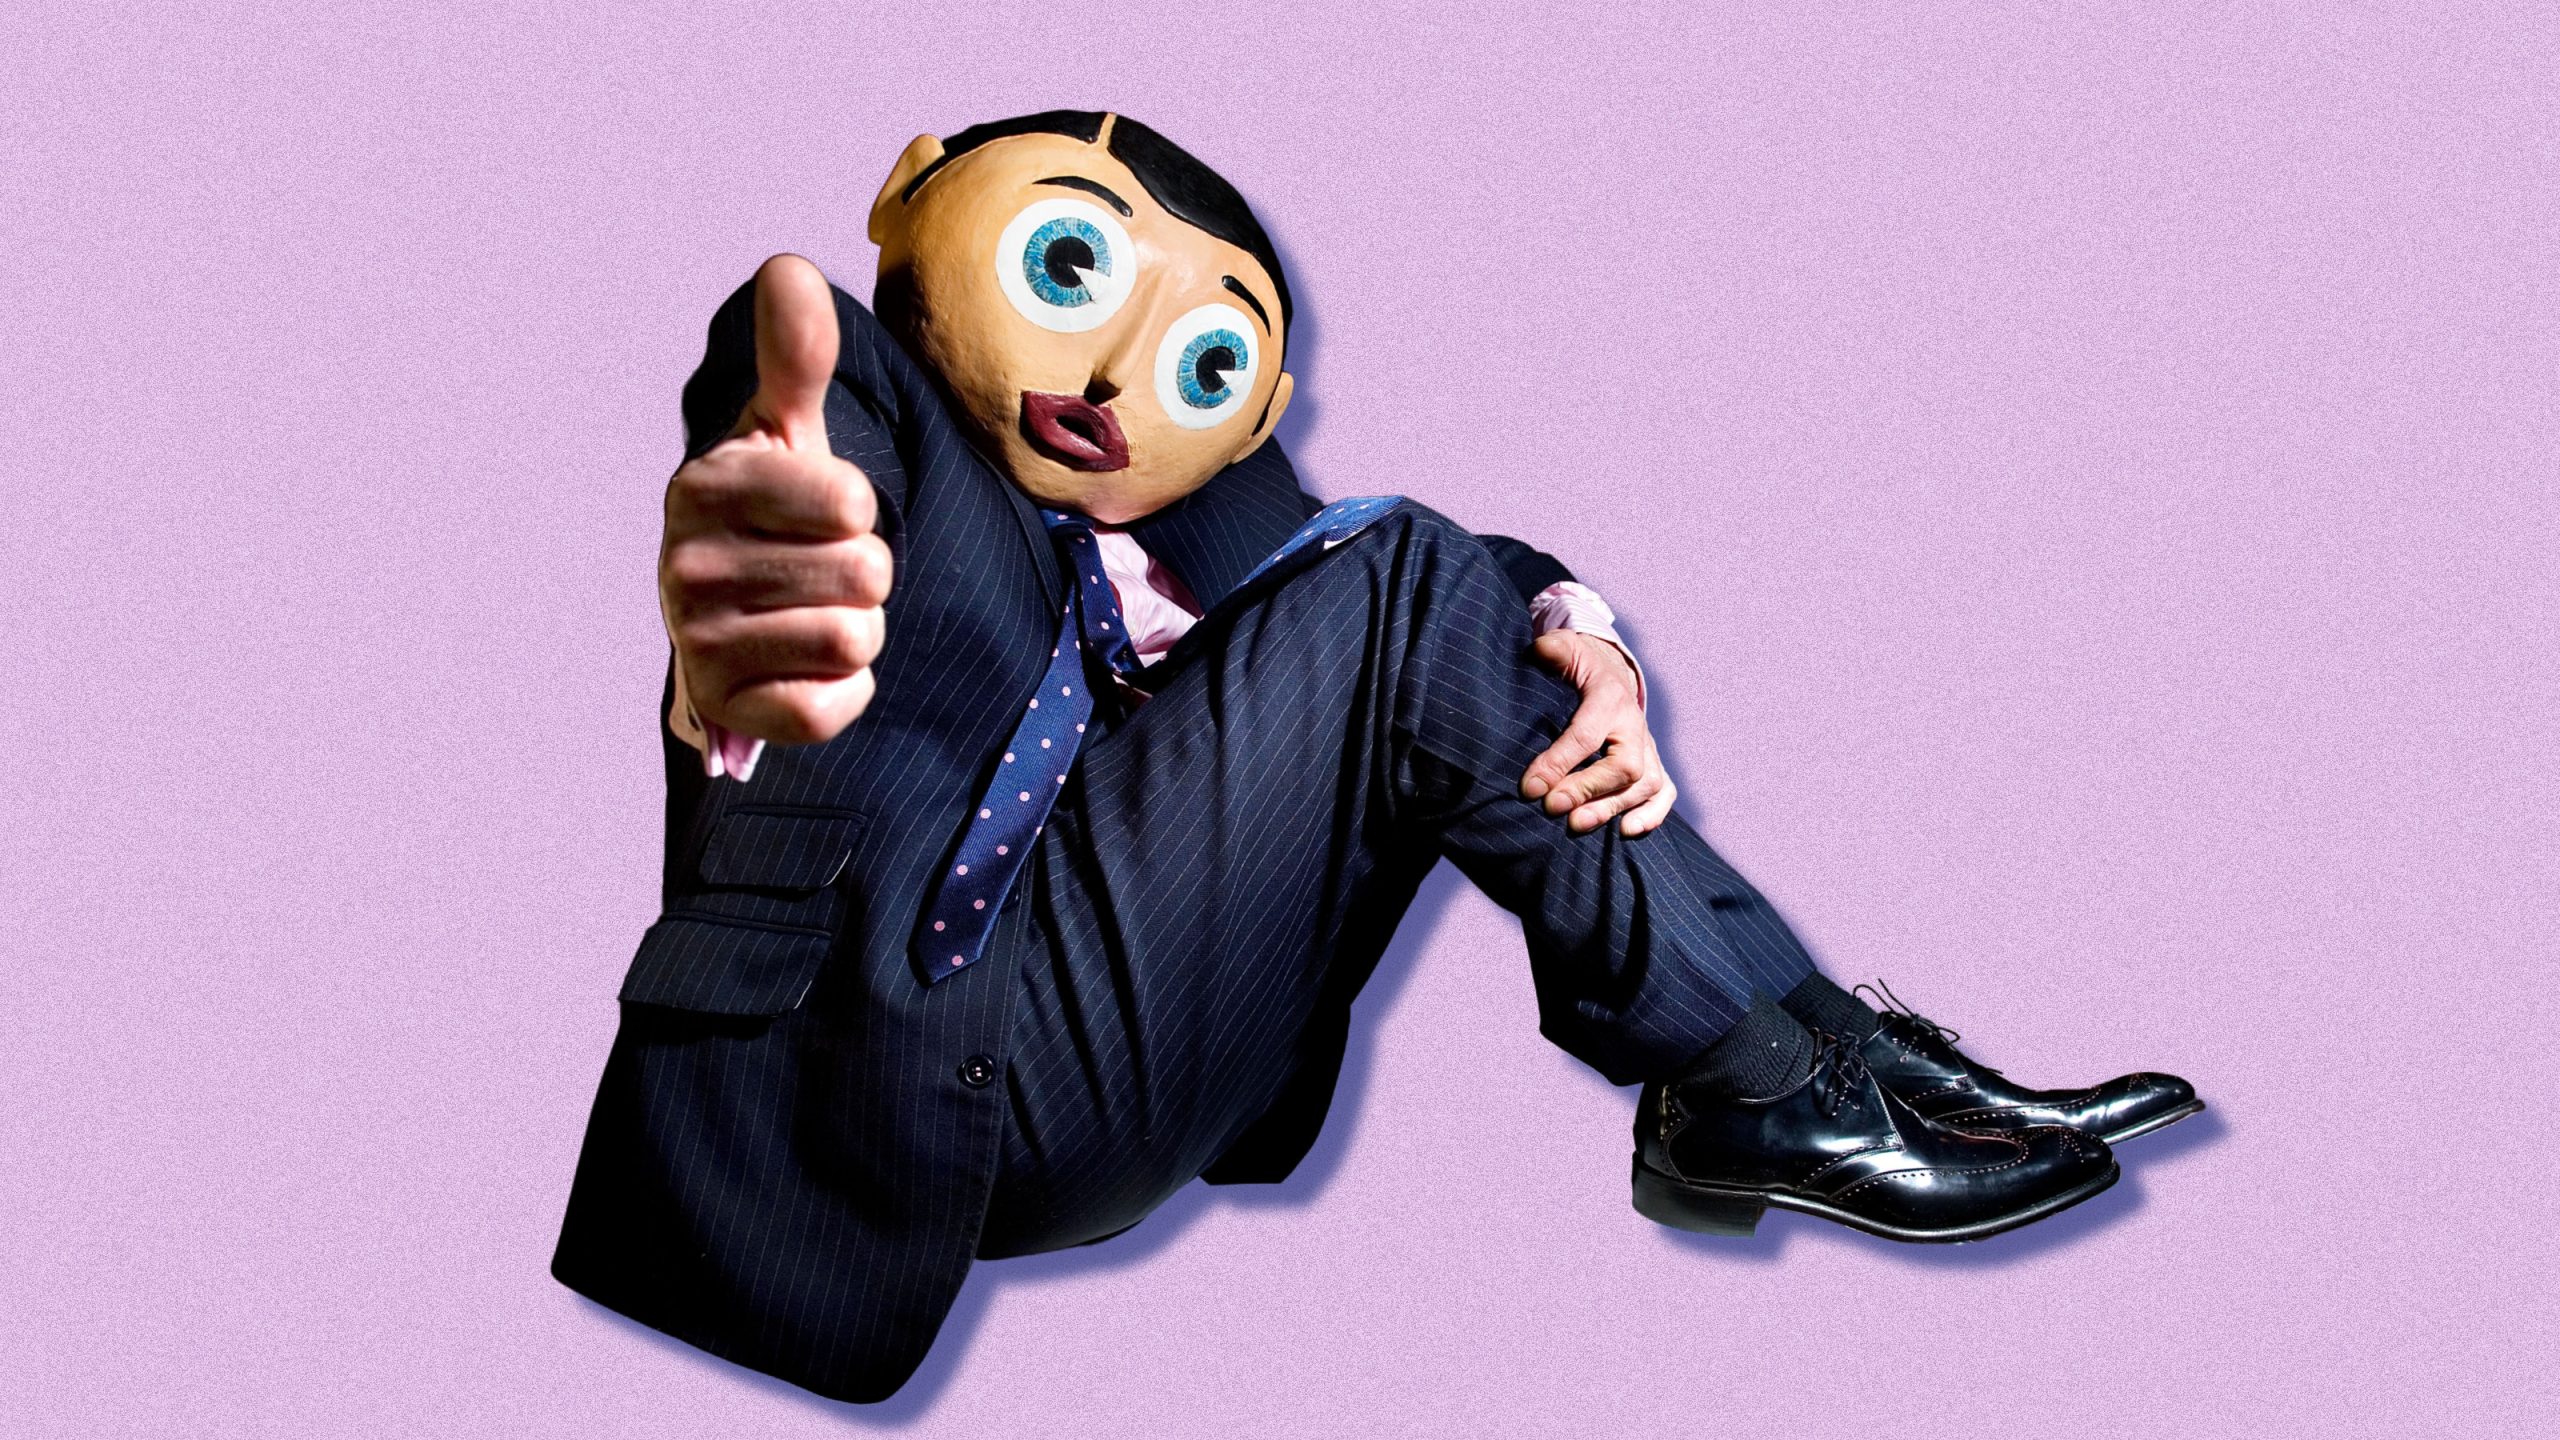 A man sitting in profile against a lilac-colored background, wearing a well-tailored pinstripe suit. He also has a giant plastic head in place of his actual head, and is giving a thumbs-up gesture to the camera.